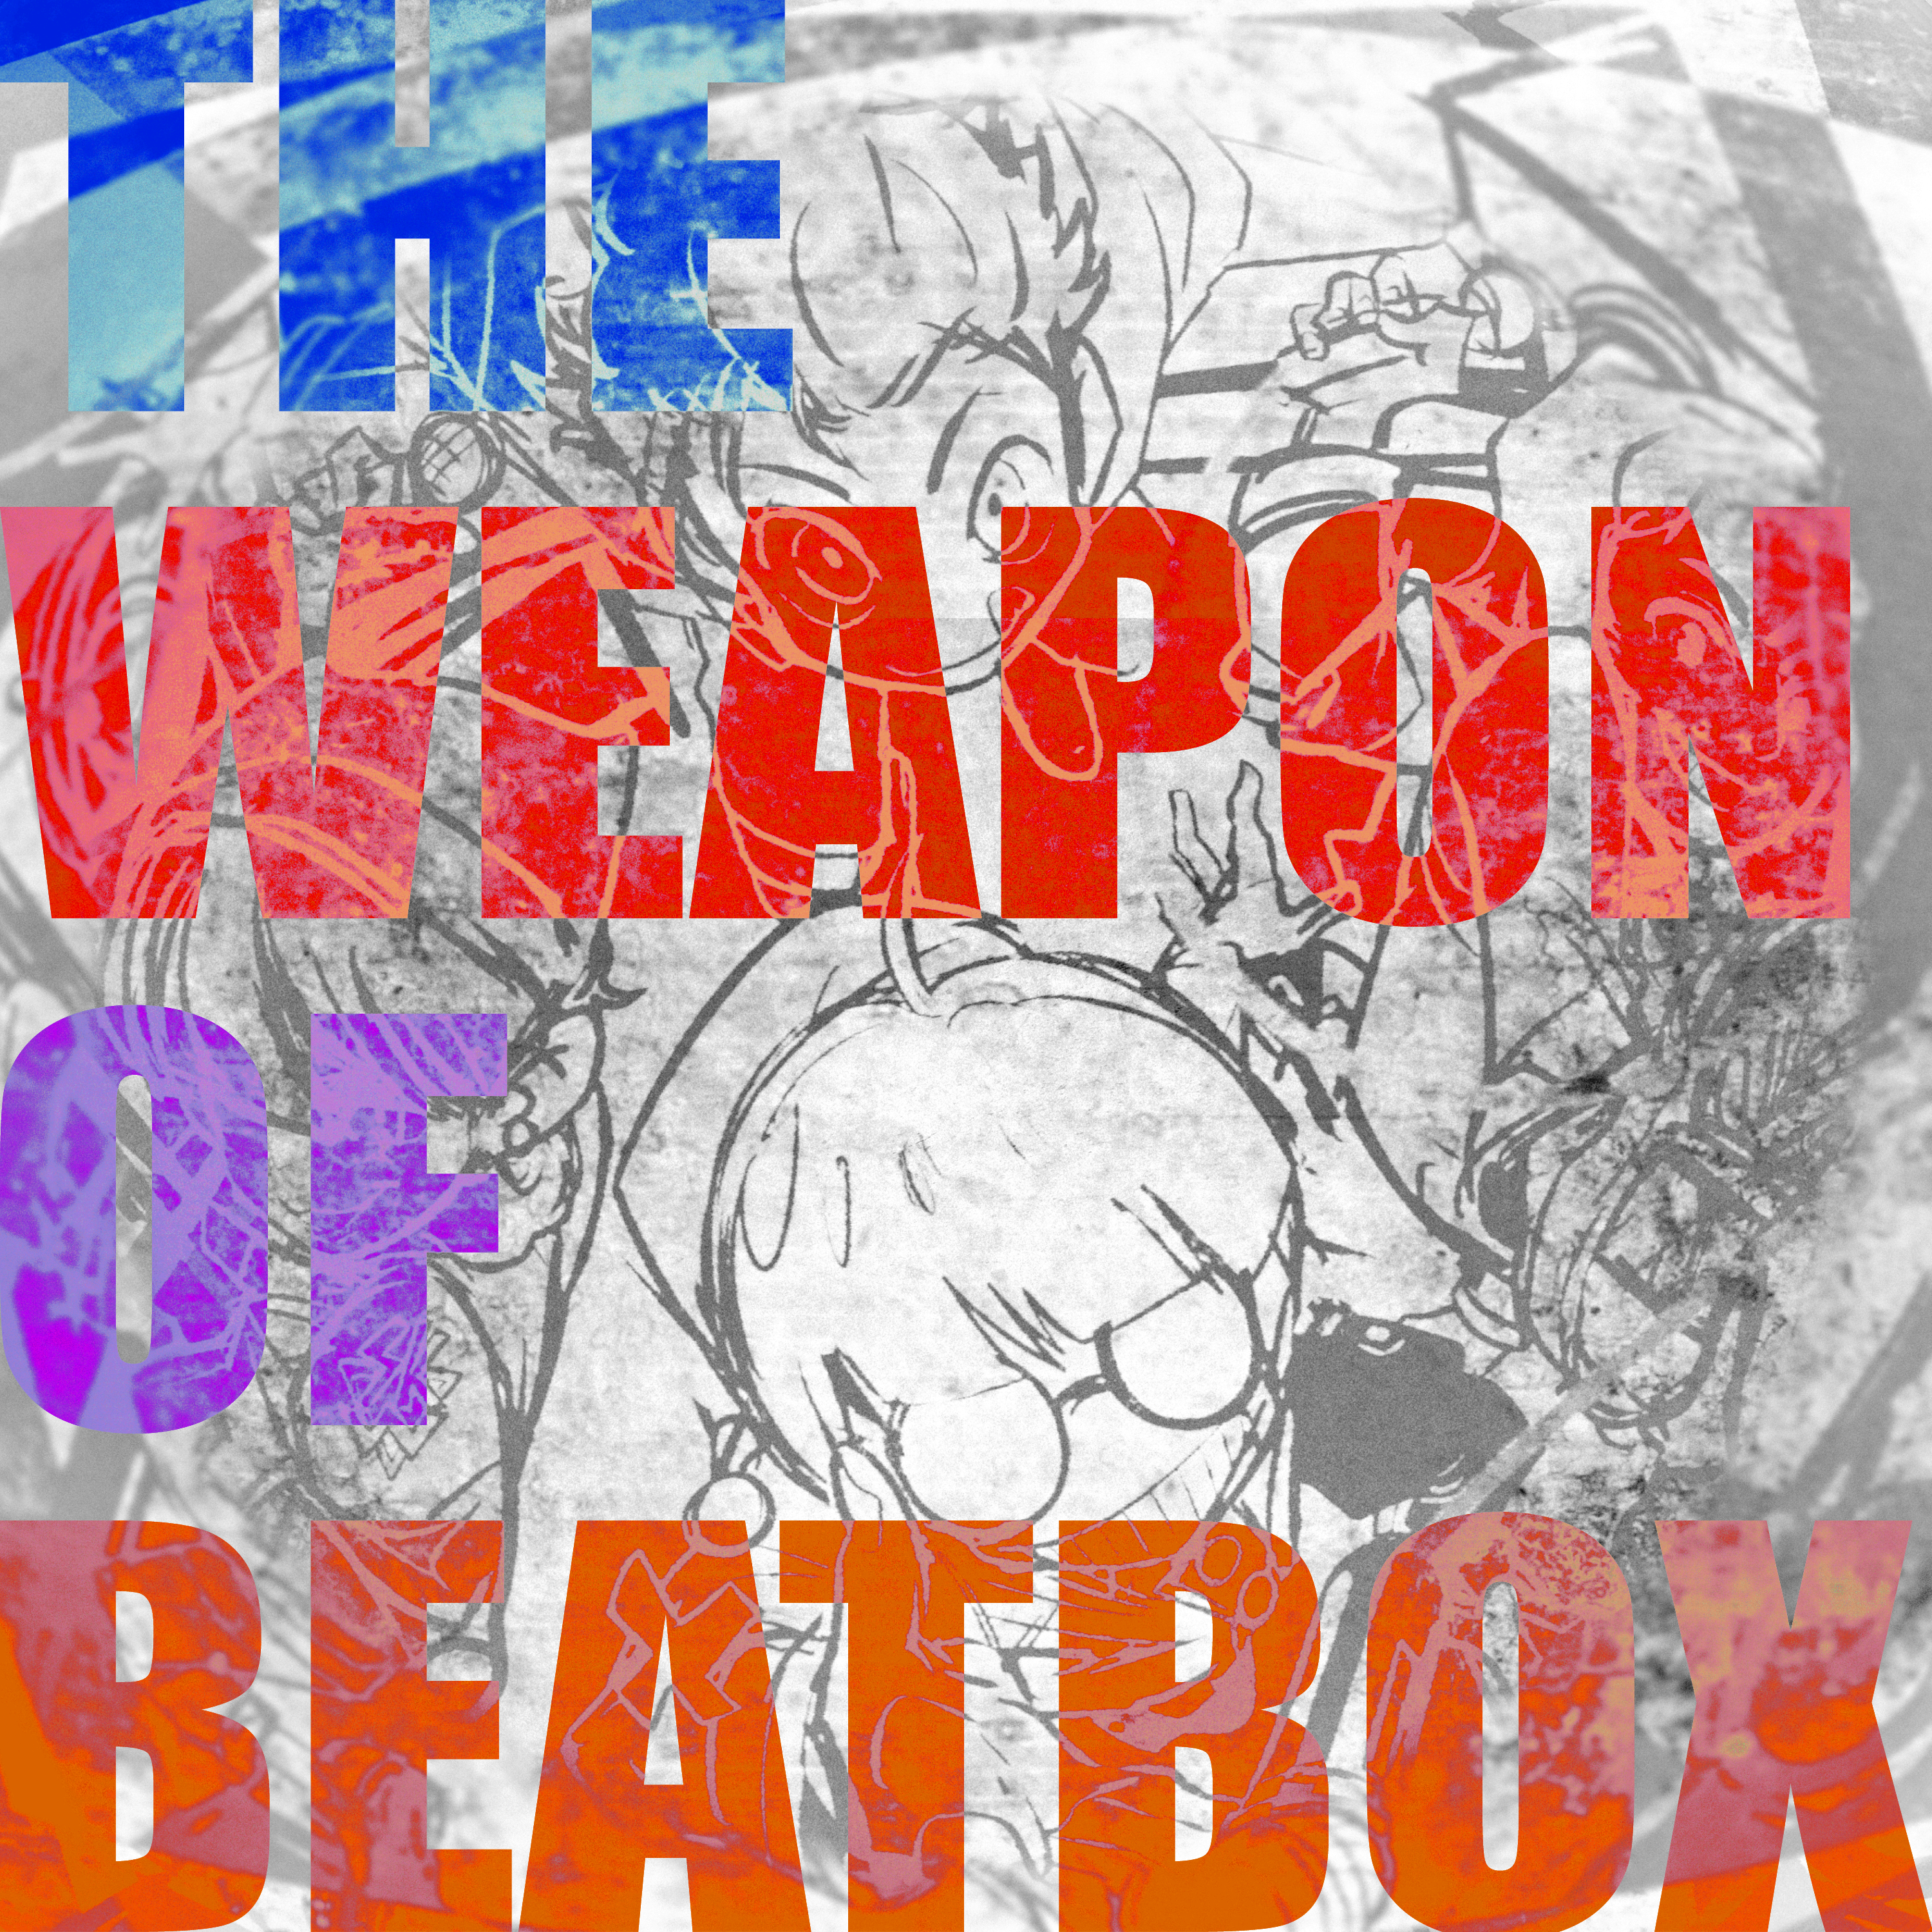 THE WEAPON OF BEATBOX